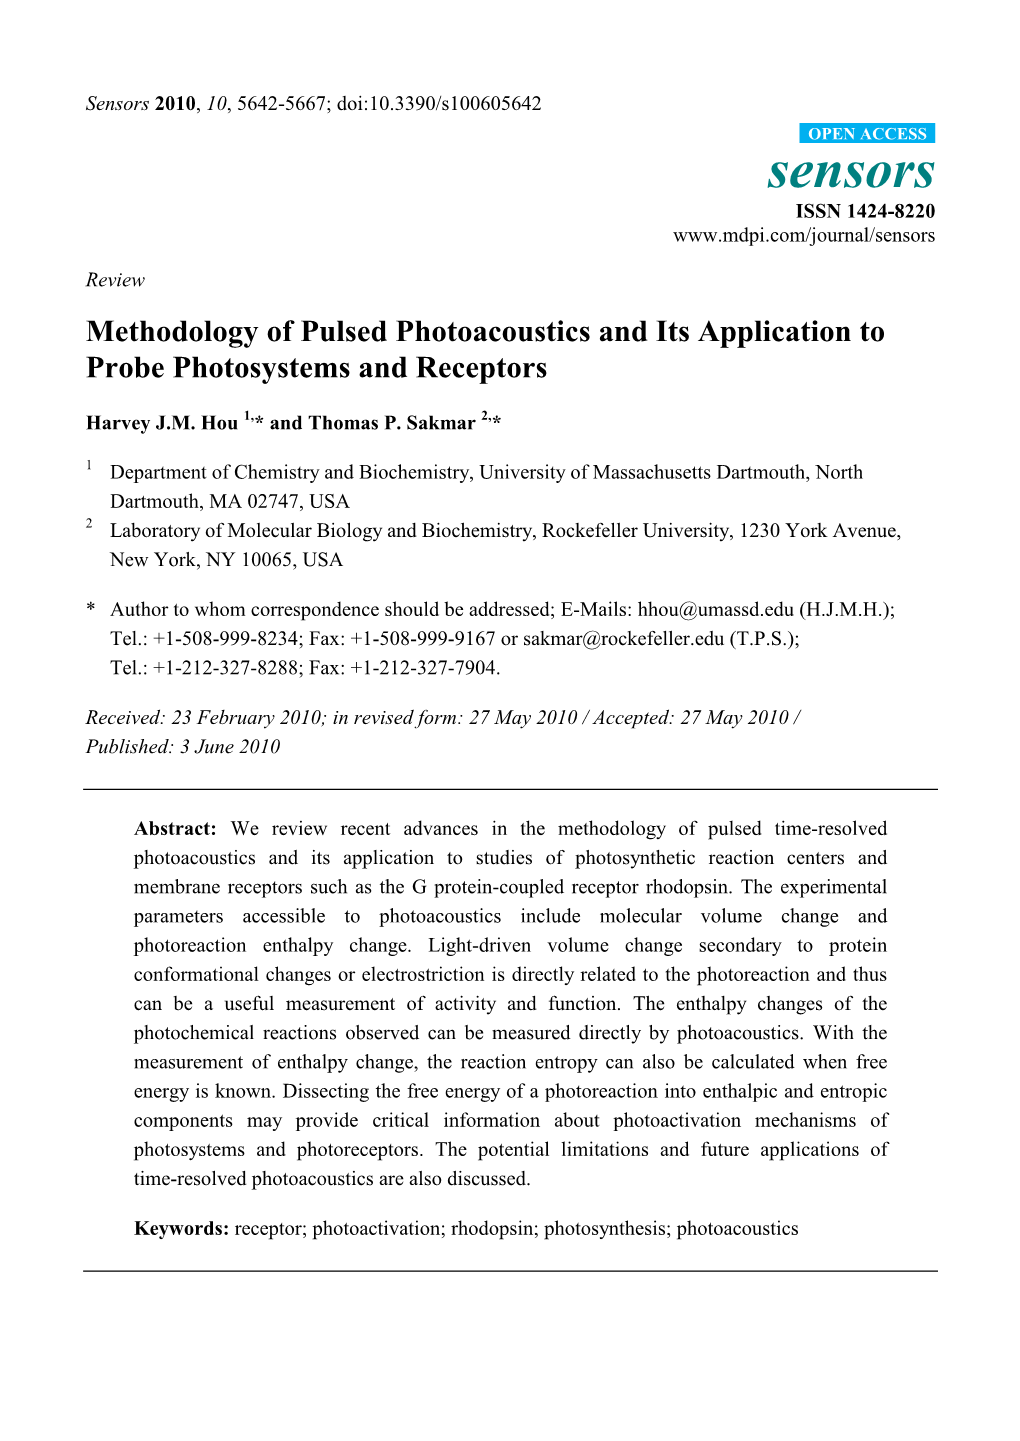 Methodology of Pulsed Photoacoustics and Its Application to Probe Photosystems and Receptors